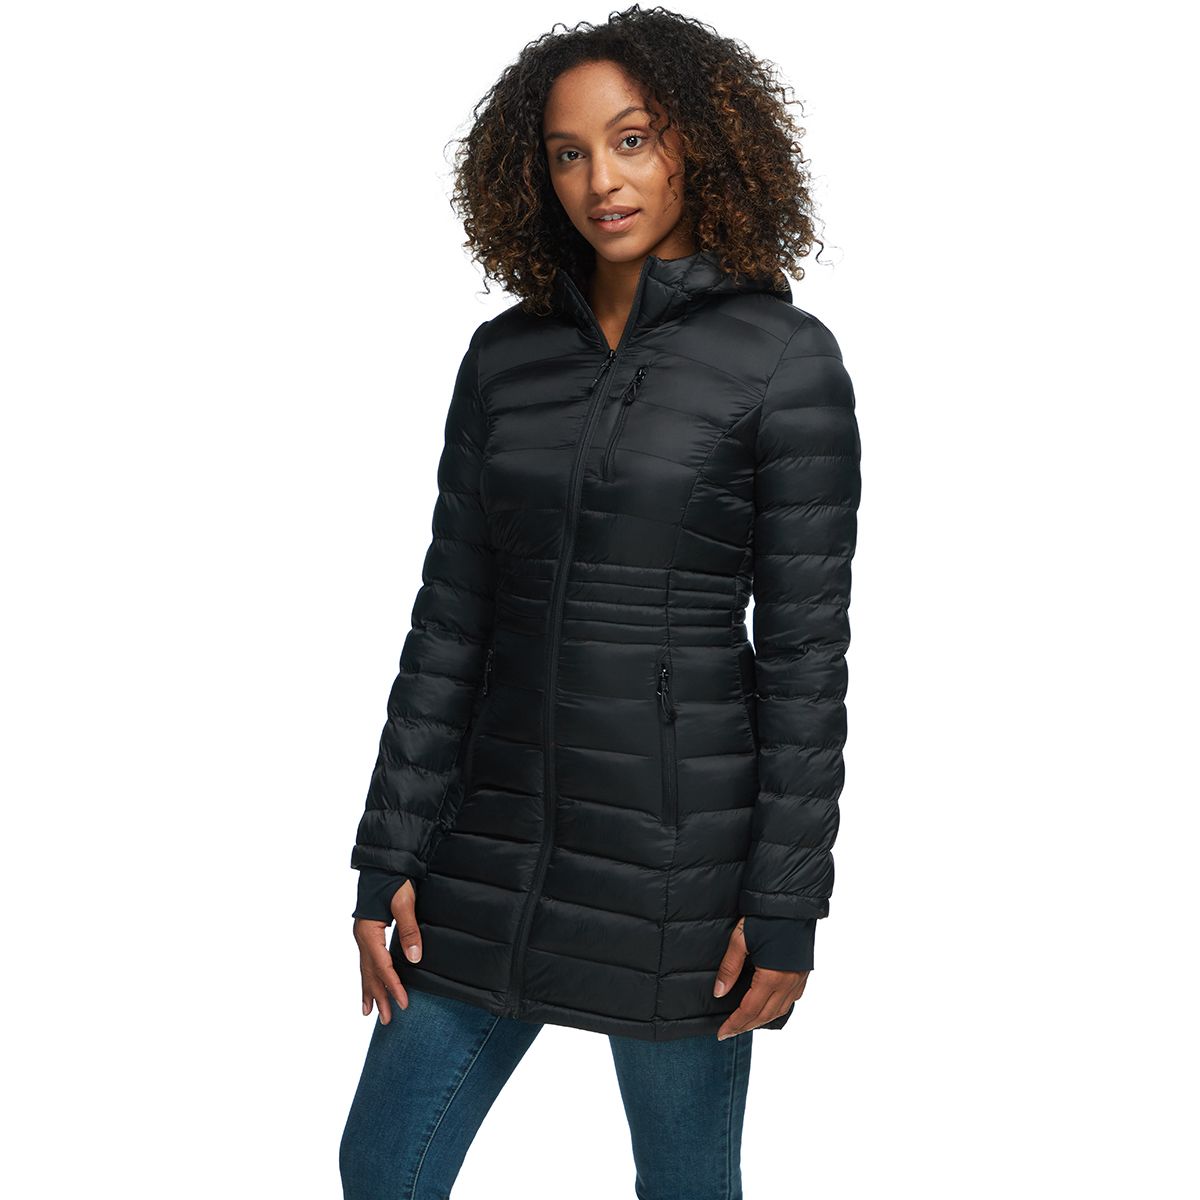 Stoic Lightweight Insulated Parka - Women's - Clothing